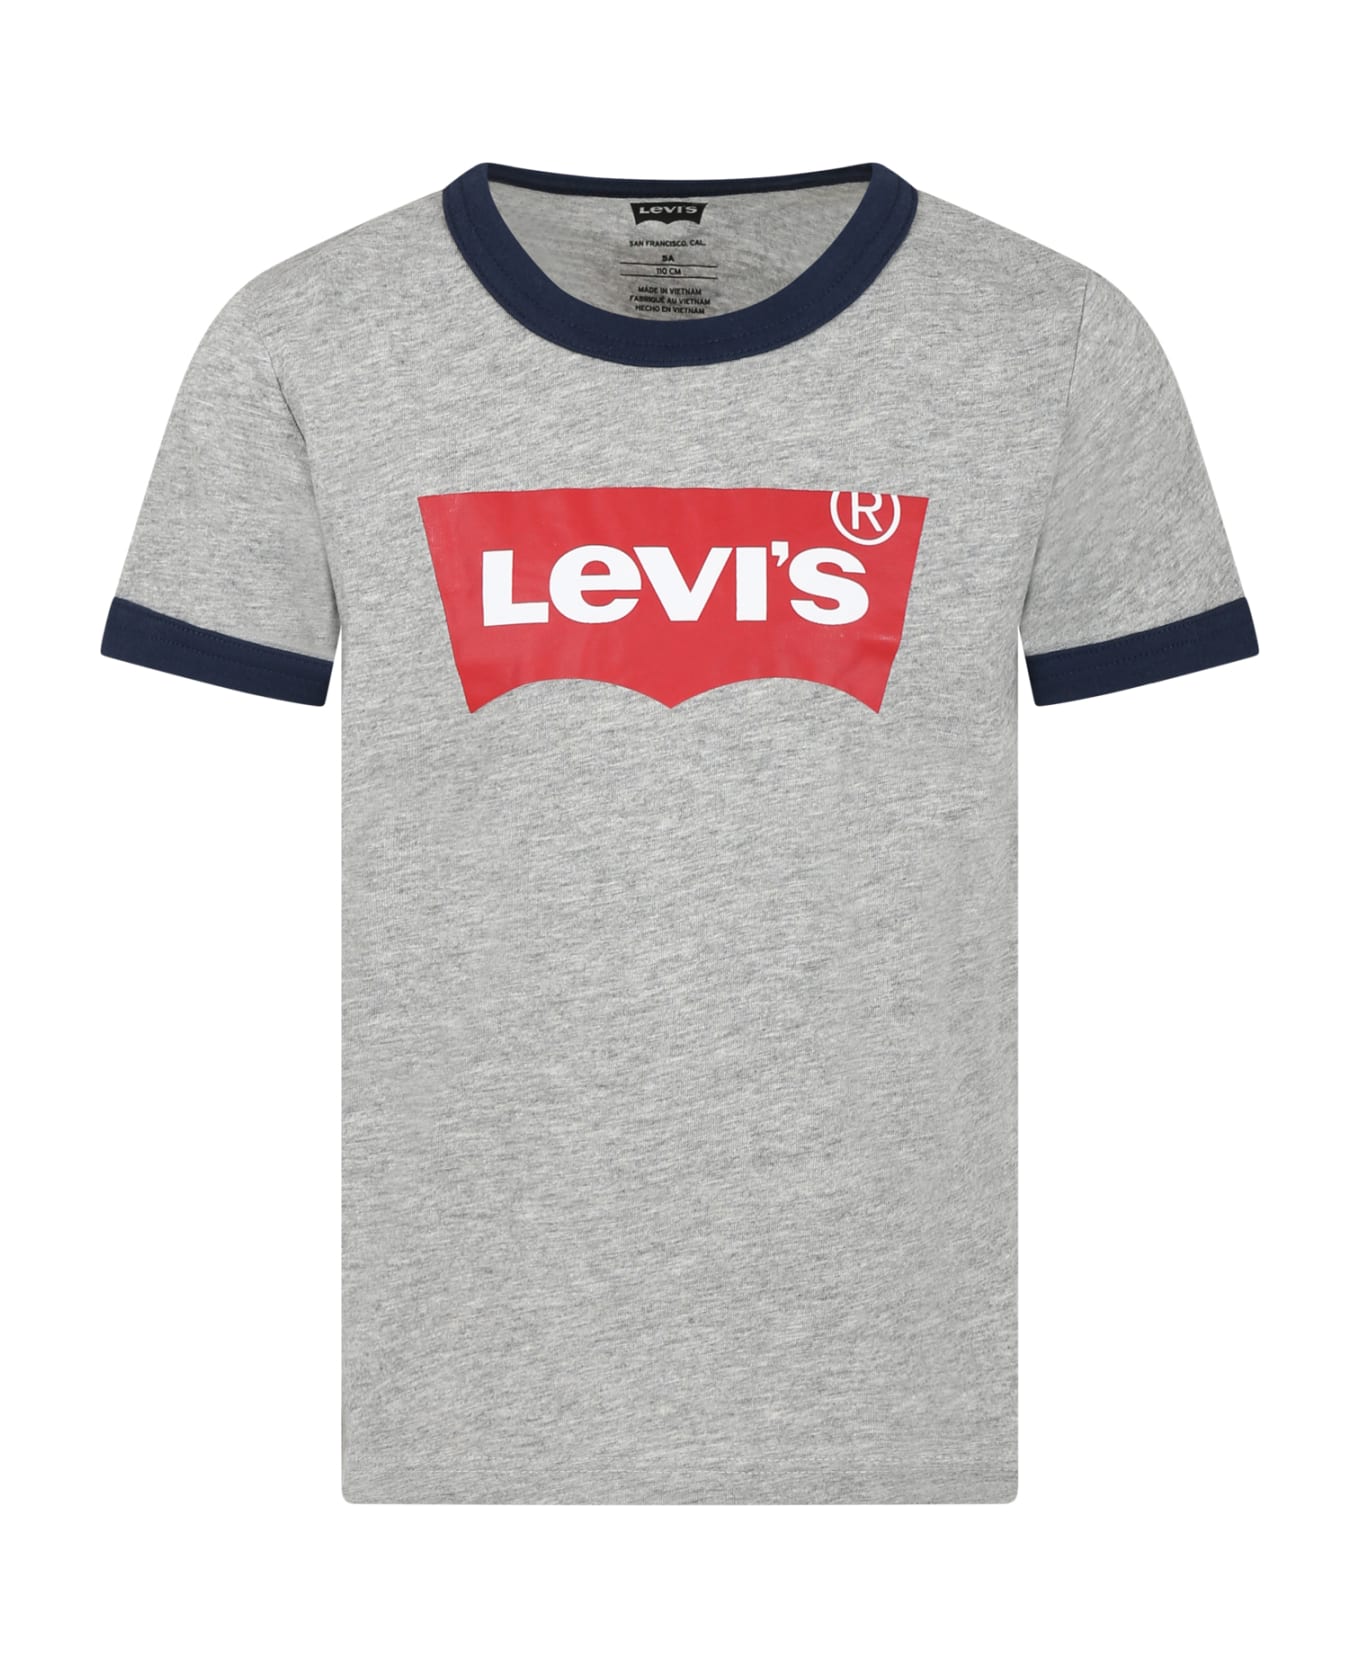 Levi's Grey T-shirt For Kids With Logo - Grey